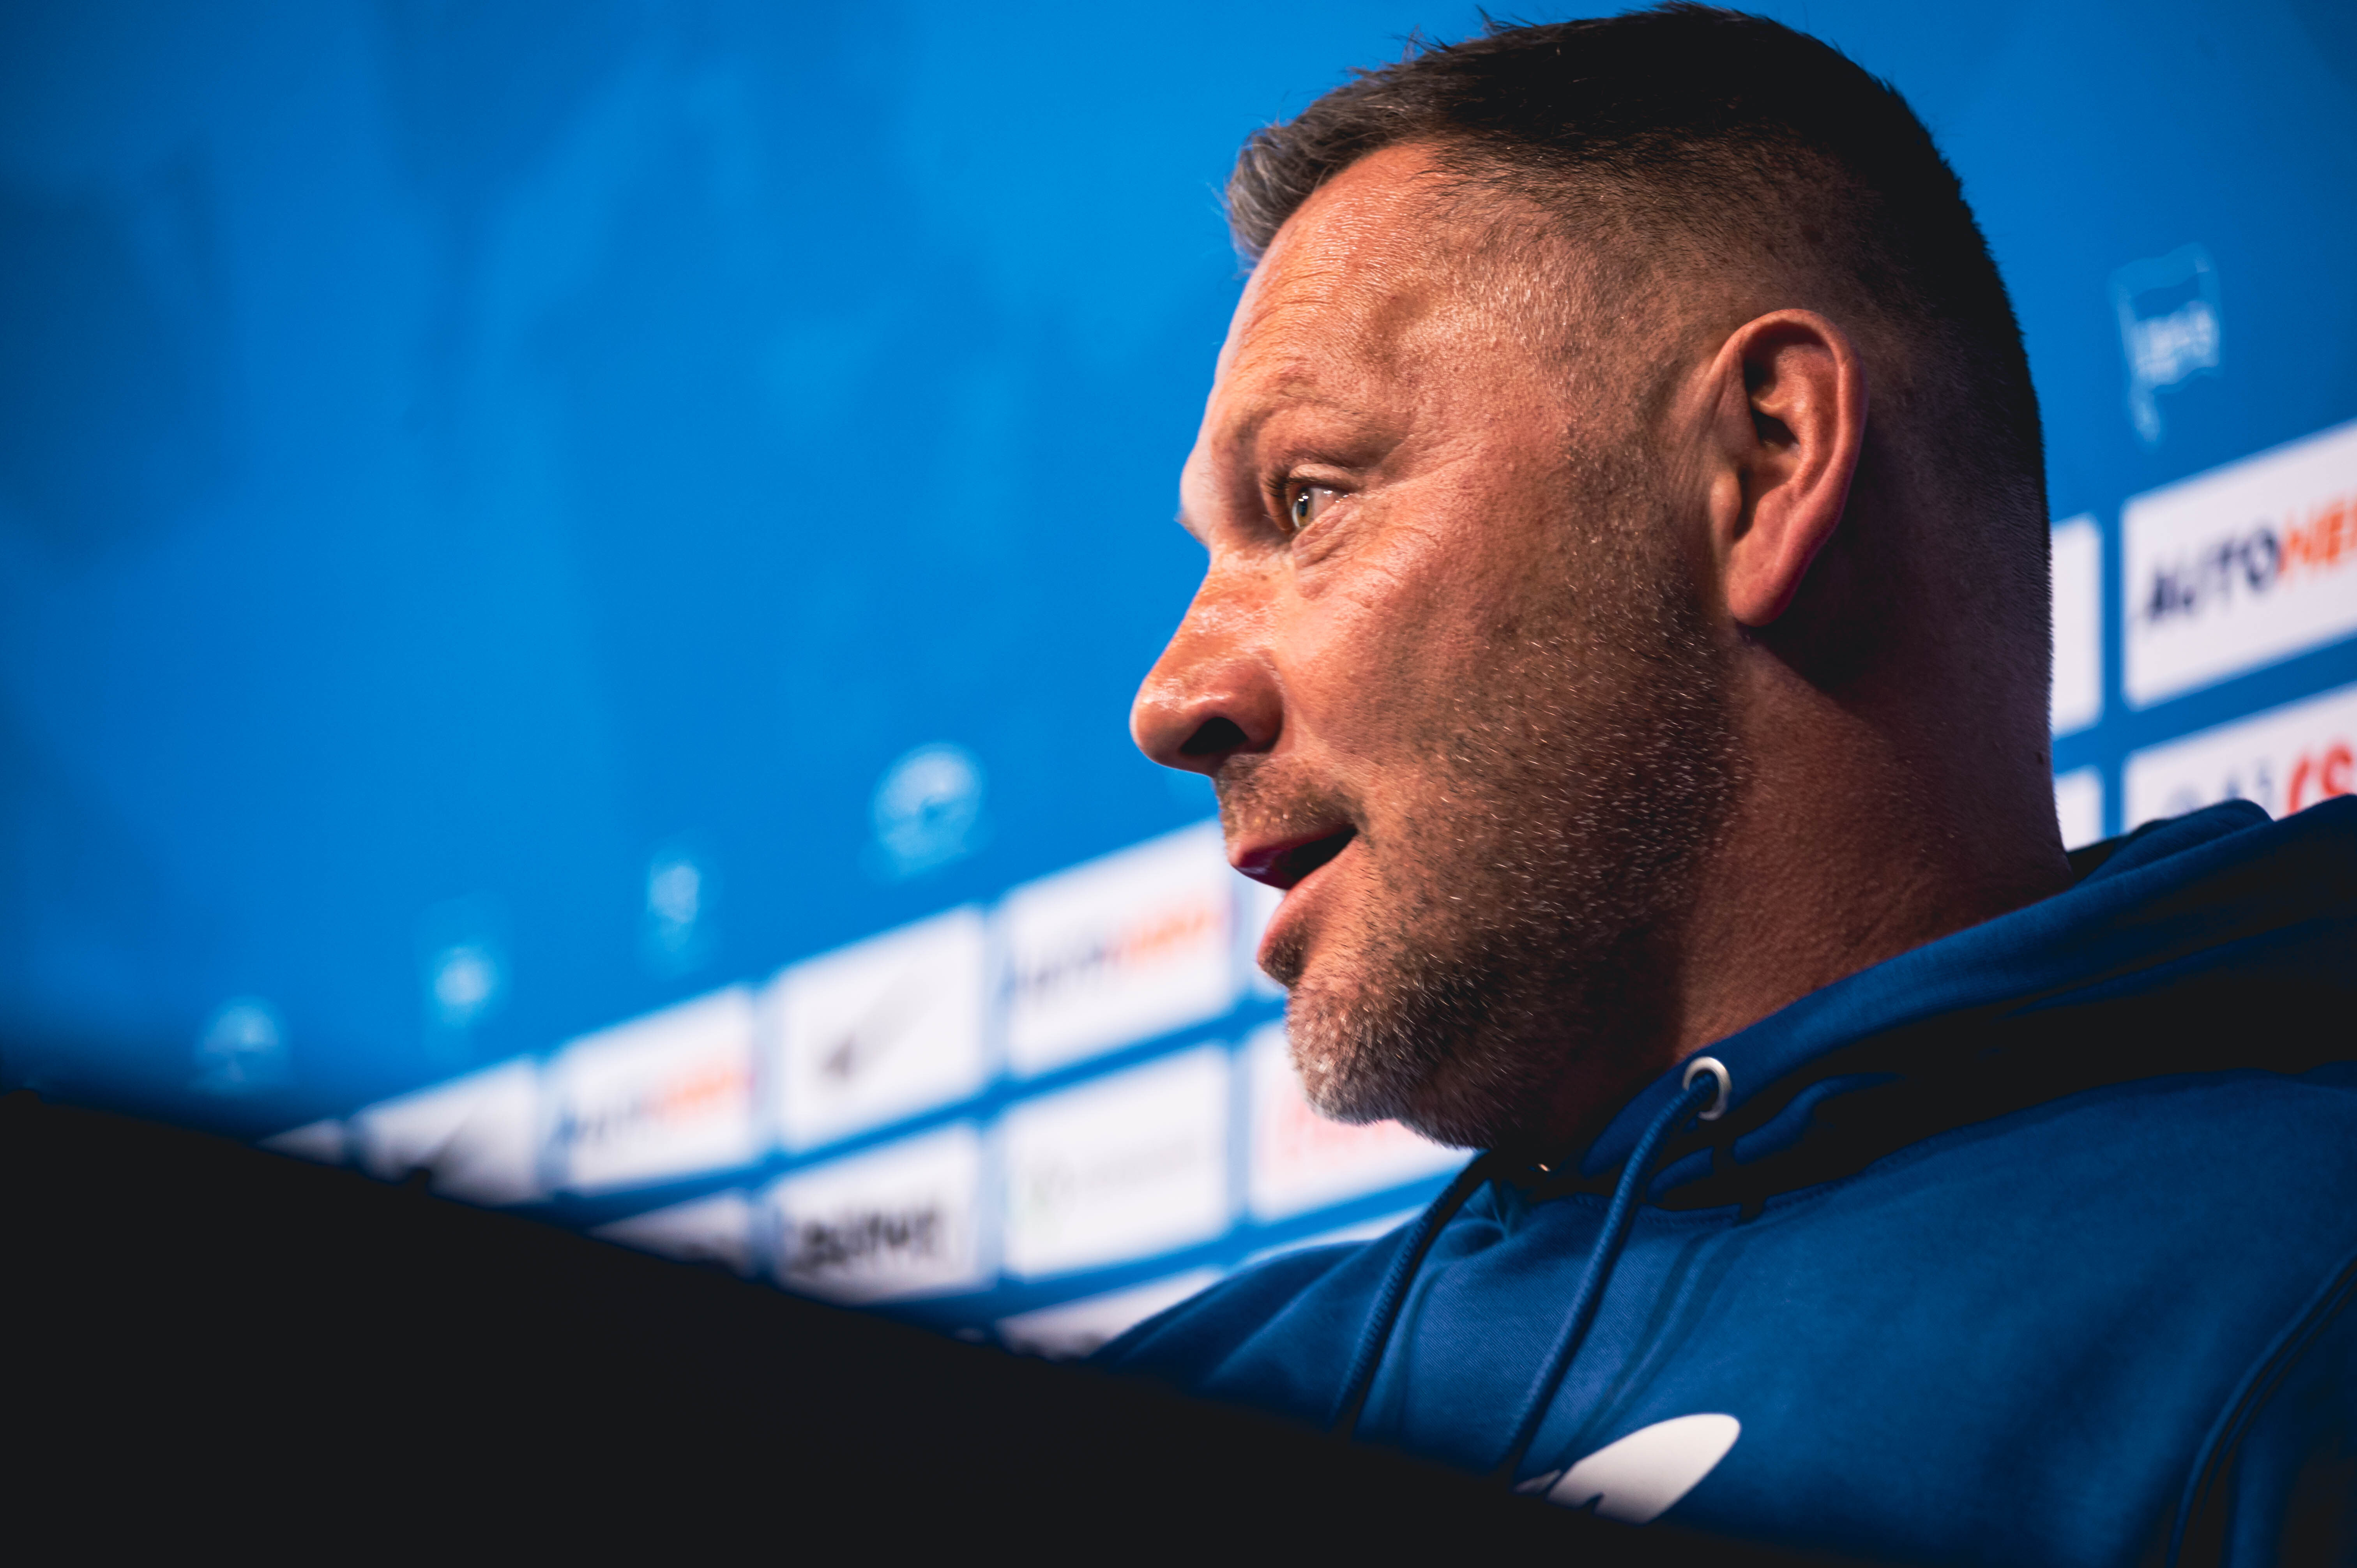 Pál Dárdai at the press conference ahead of Werder Bremen.